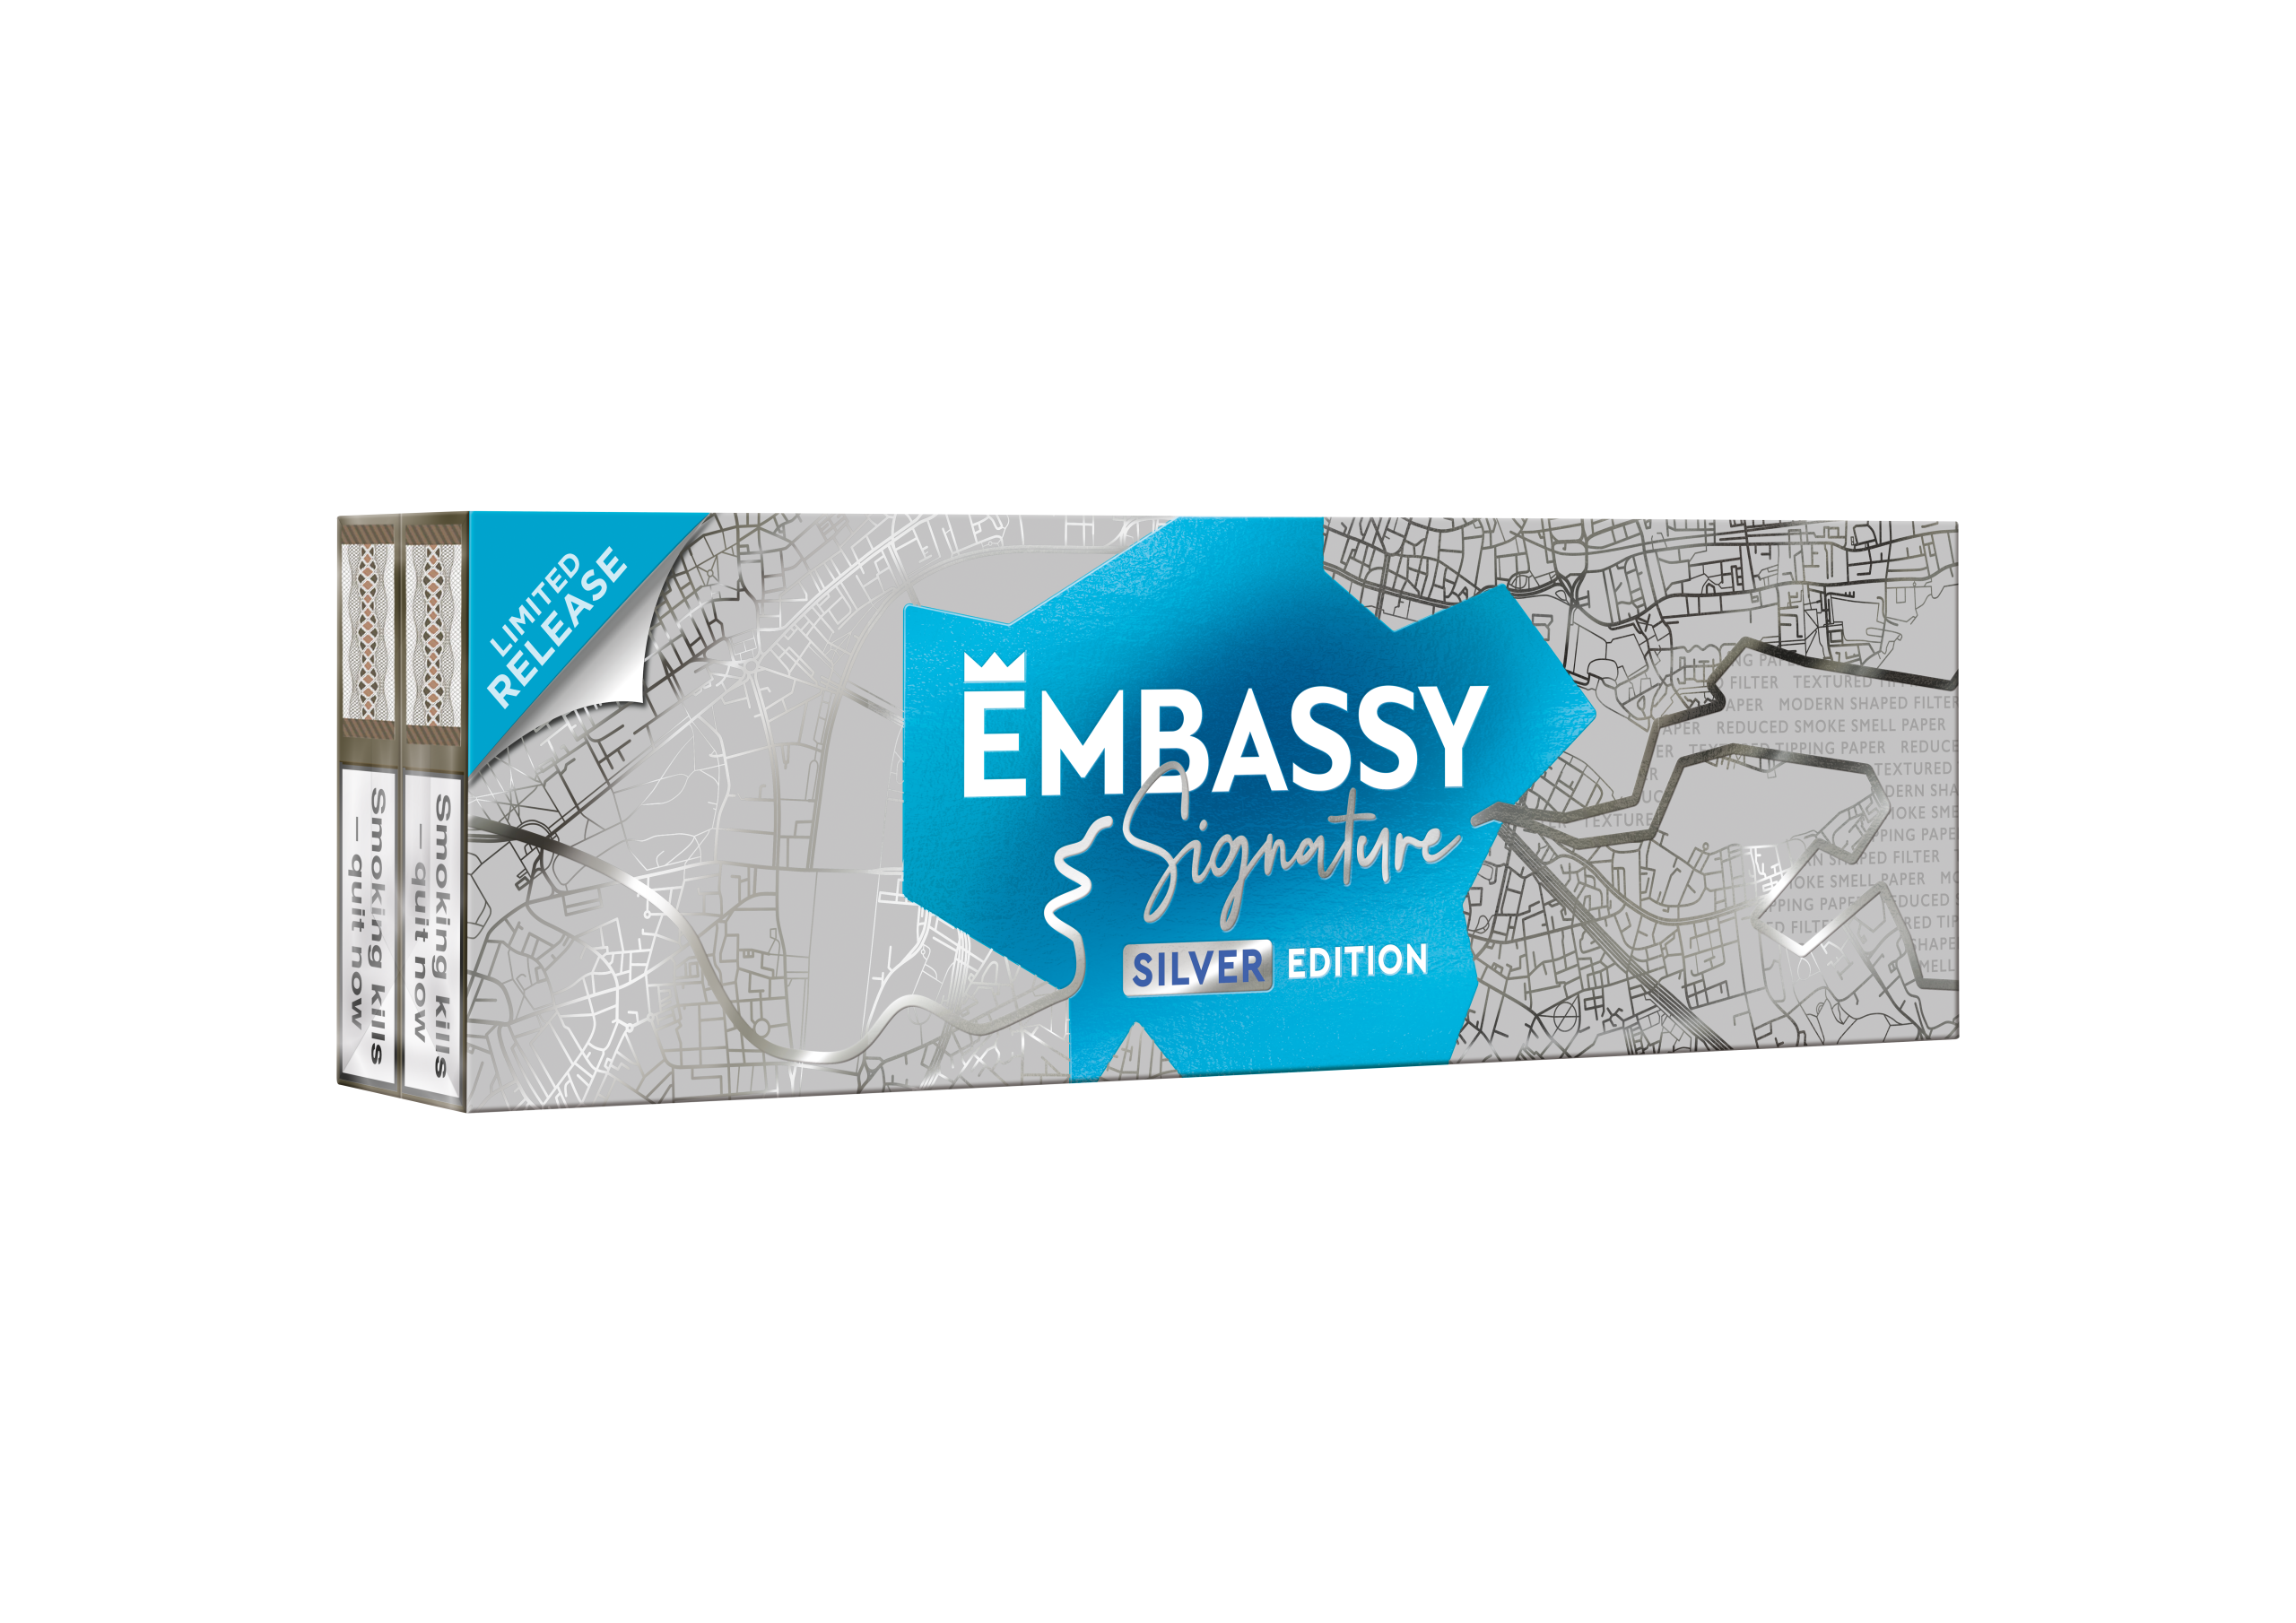 Imperial Tobacco launches enhanced Embassy Signature Silver Edition